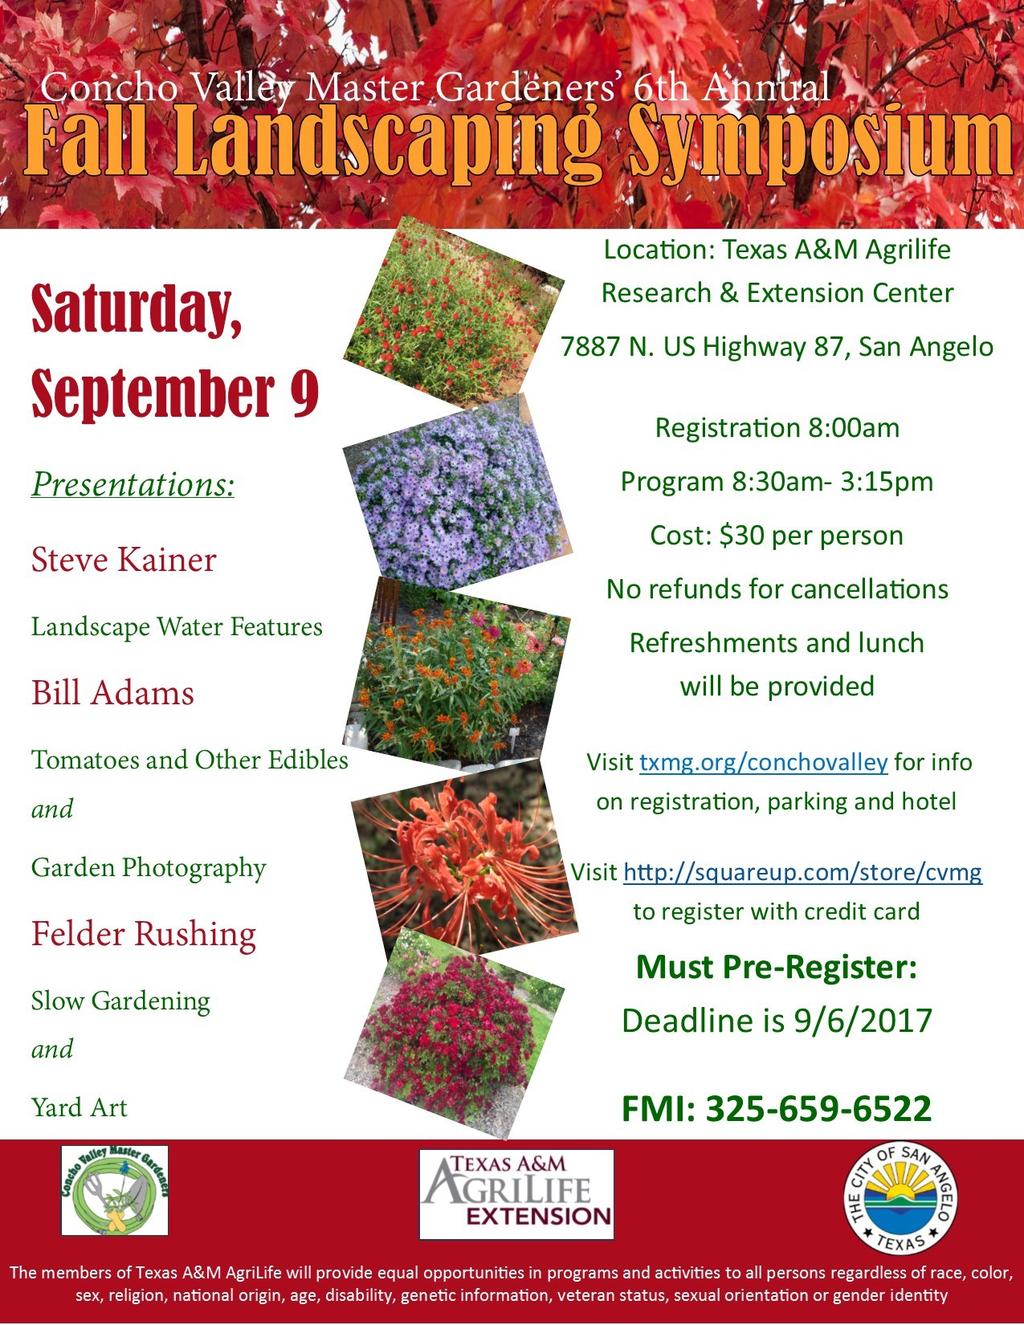 garden pests. Save the date registration is now open for the Fall Landscaping Symposium! Don t miss this fun-filled day, visit: http://txmg.org/conchovalley/2510-2/ for more info and to pre-register.